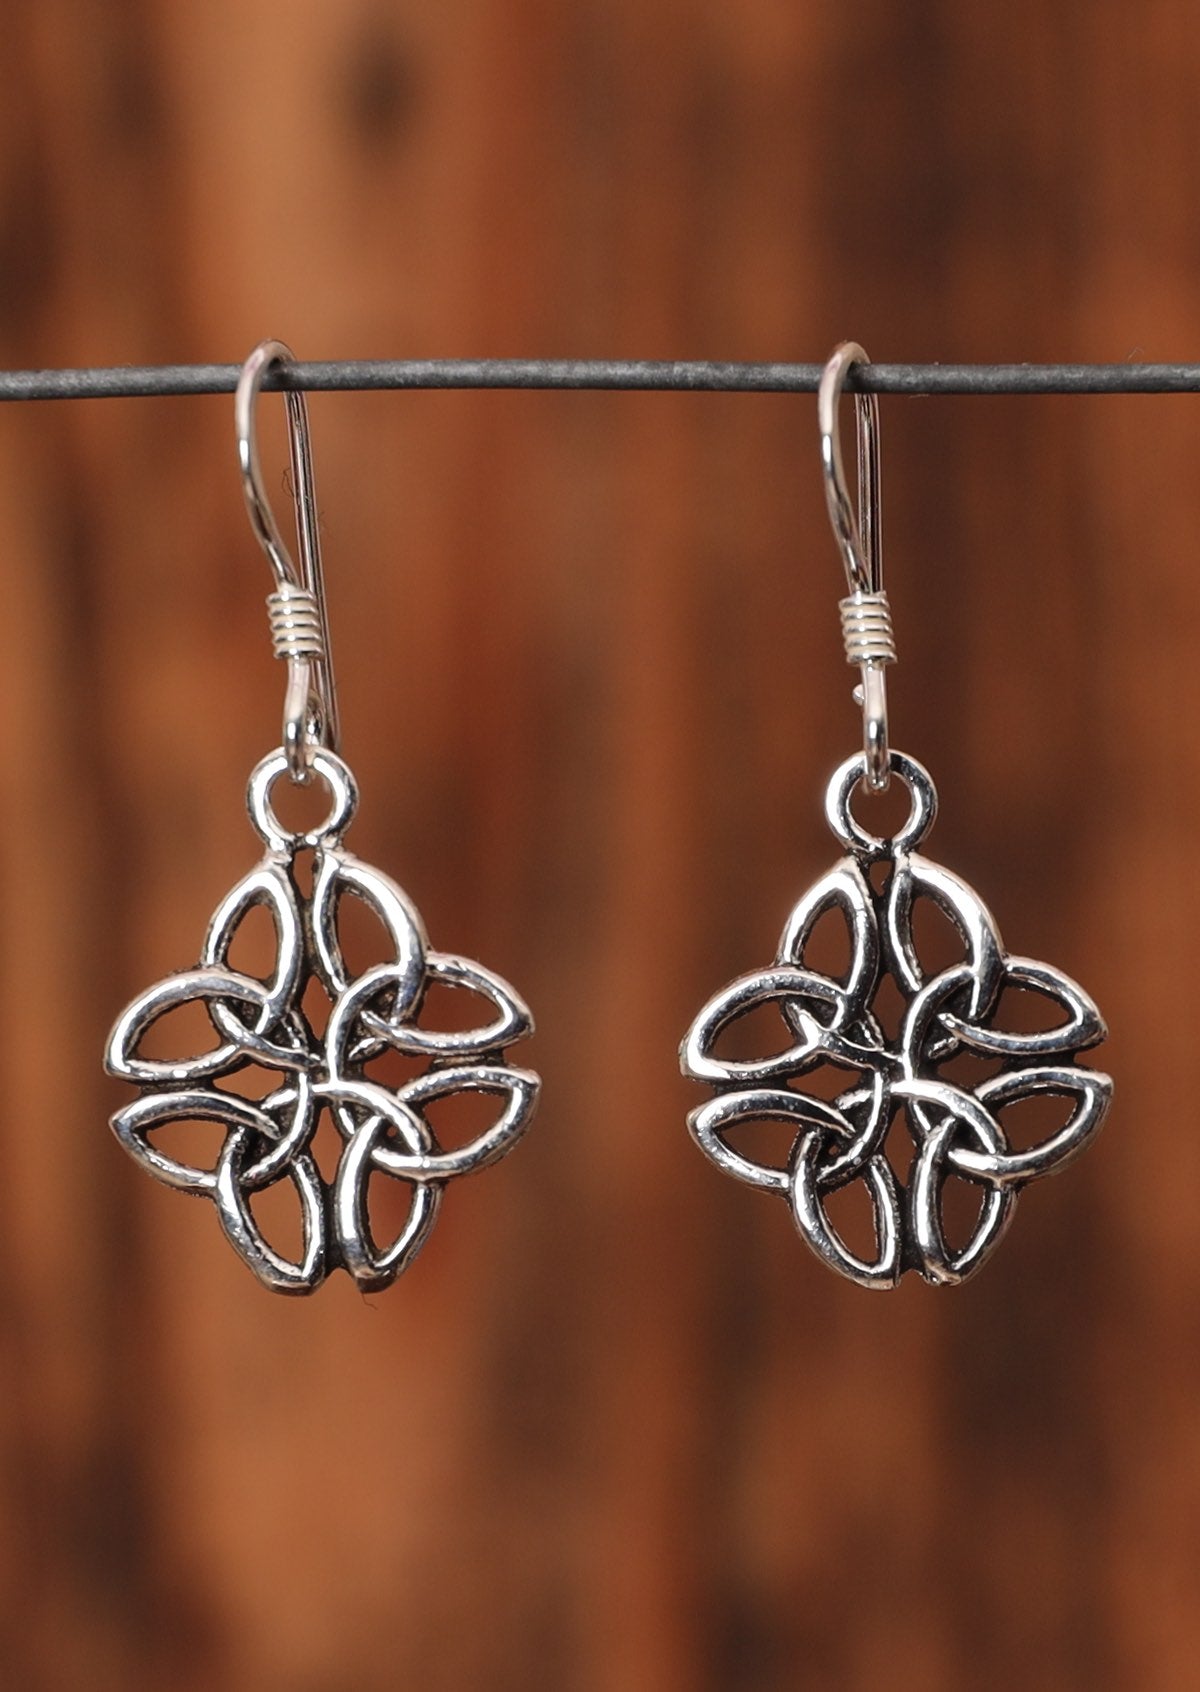 92.5% silver Celtic clover earrings sit on a wire for display.